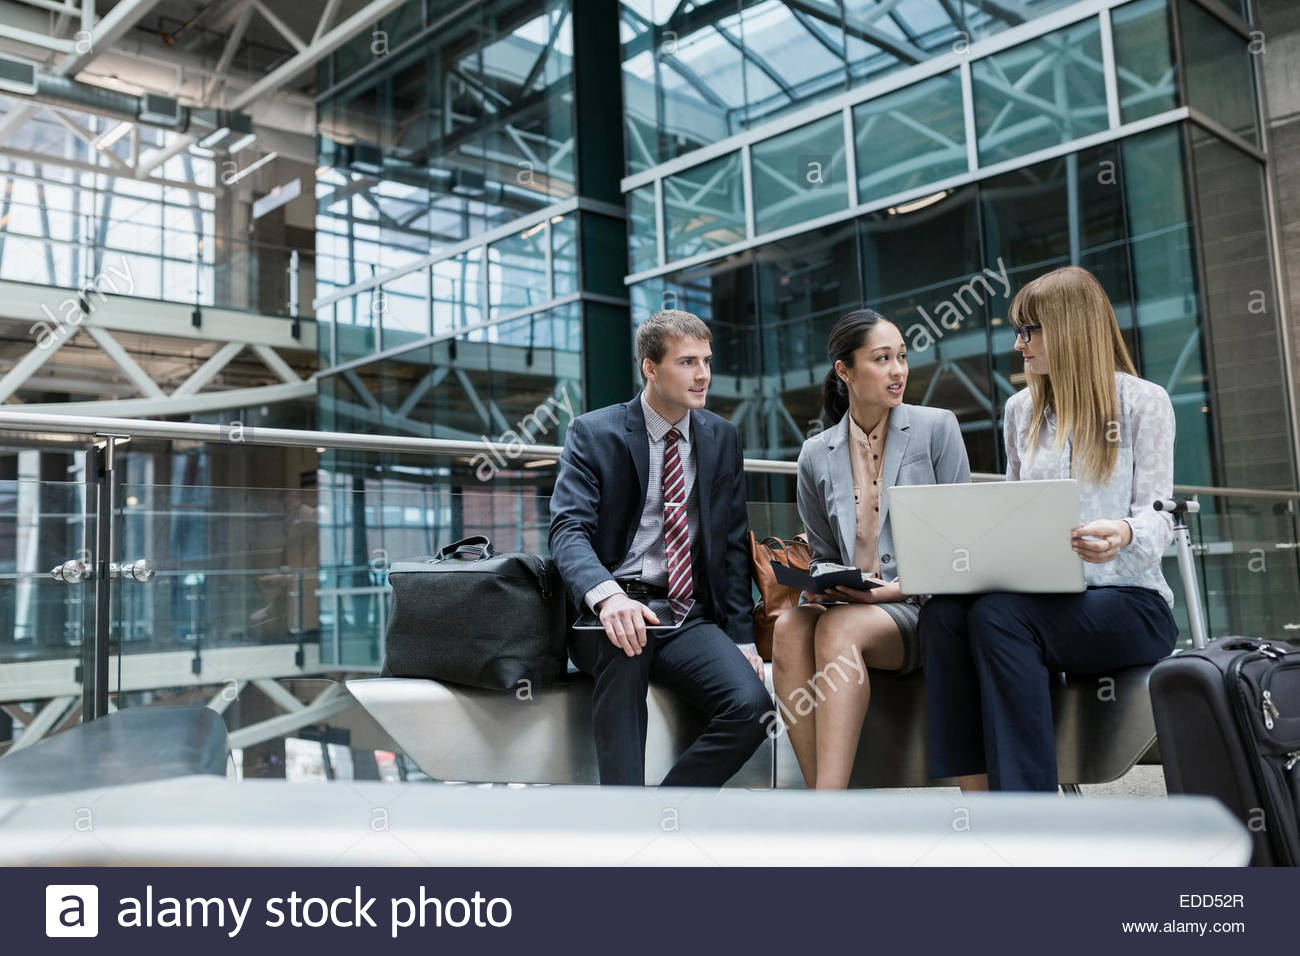 Business people using laptop in airport atrium Banque D'Images